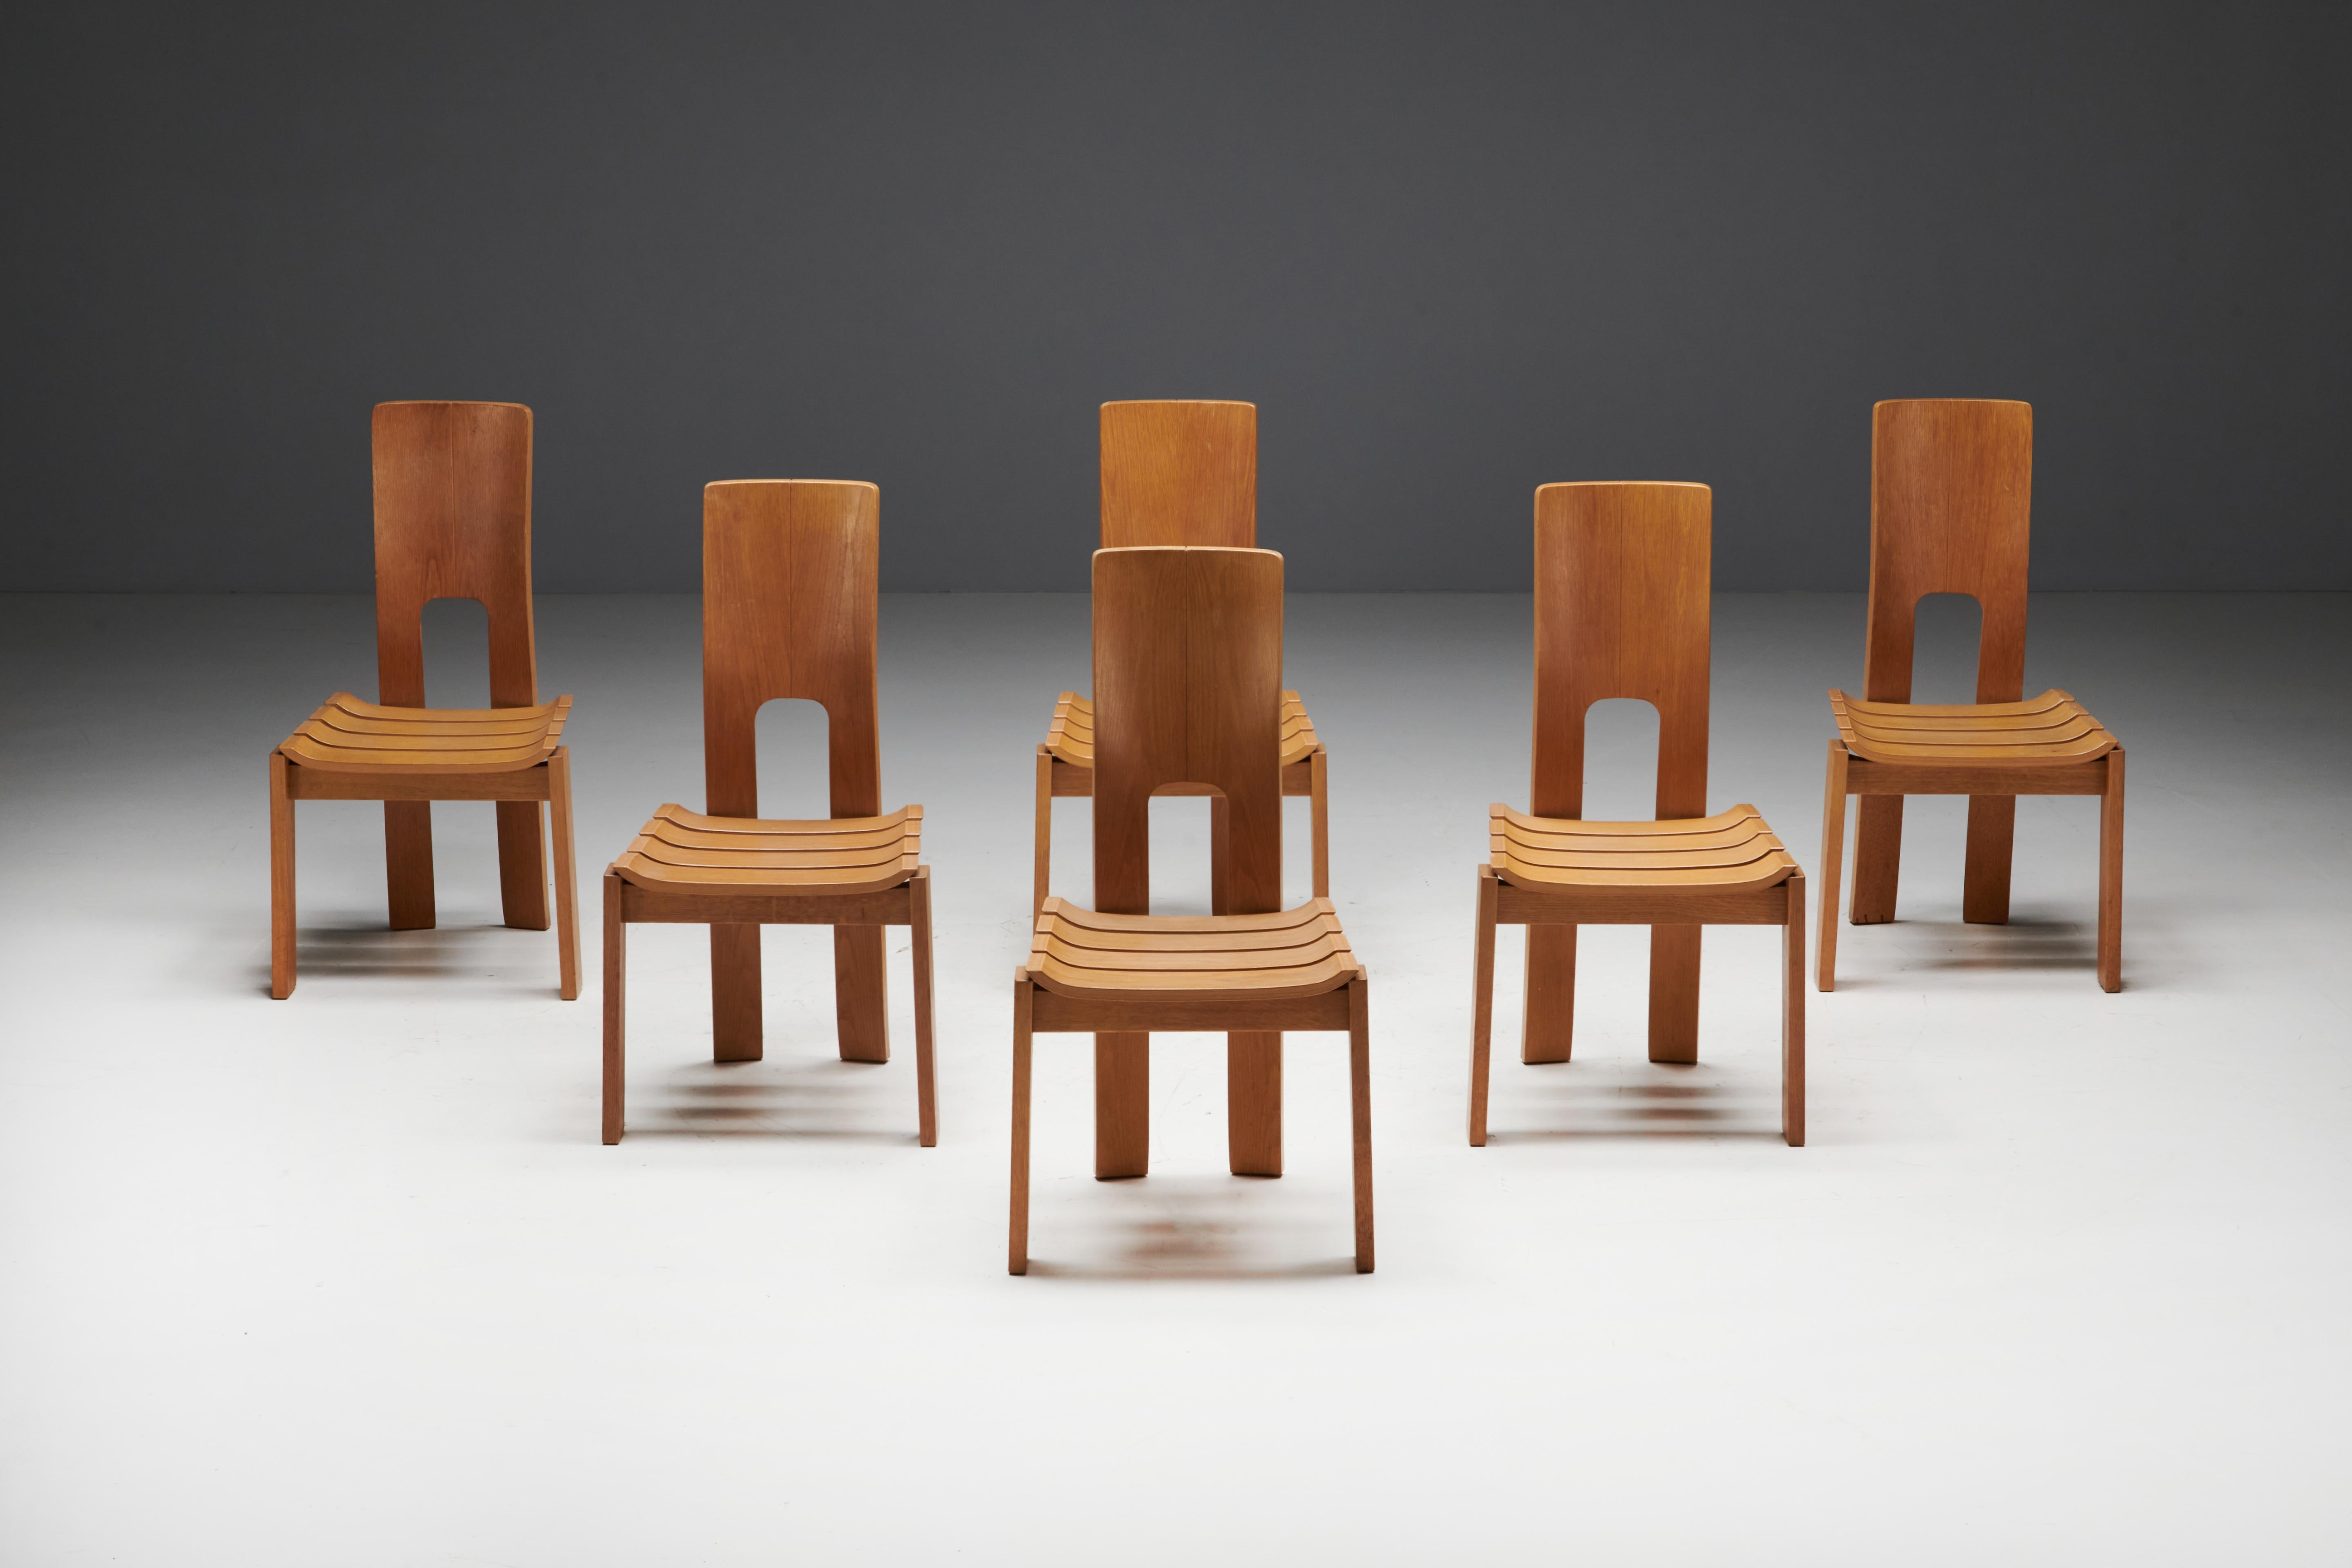 European Scandinavian Modern Plywood Dining Chairs, 1970s For Sale